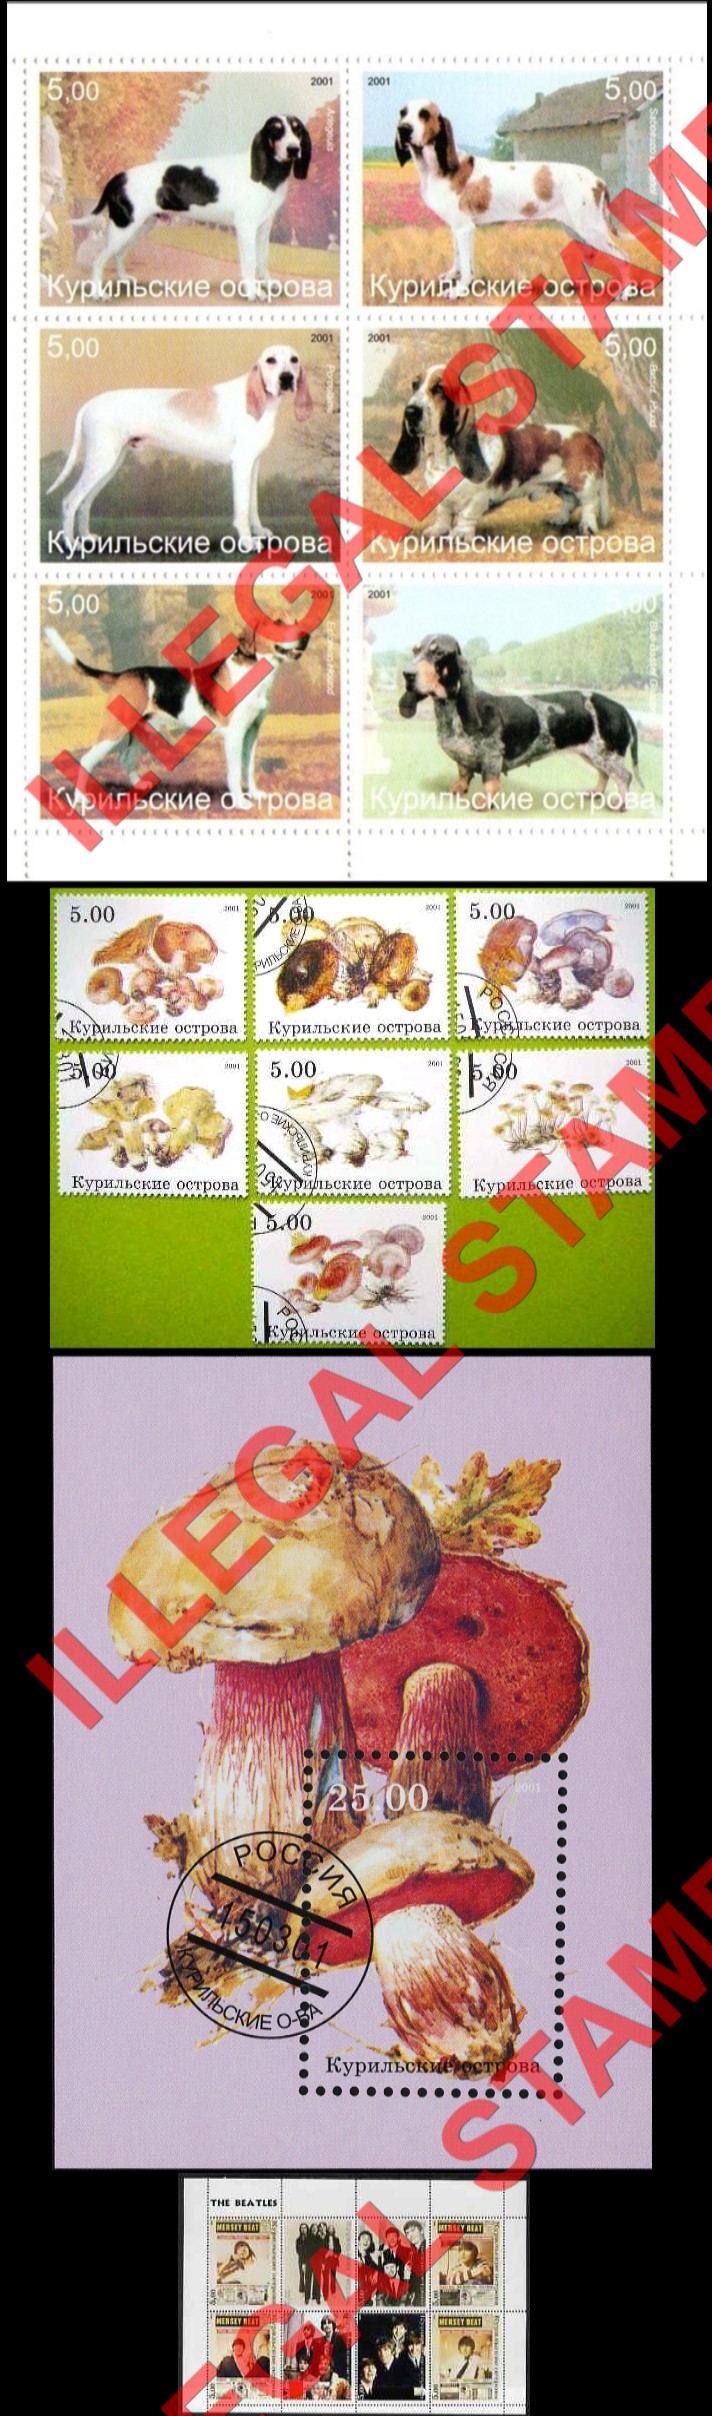 Kuril Islands 2001 Counterfeit Illegal Stamps (Part 2)